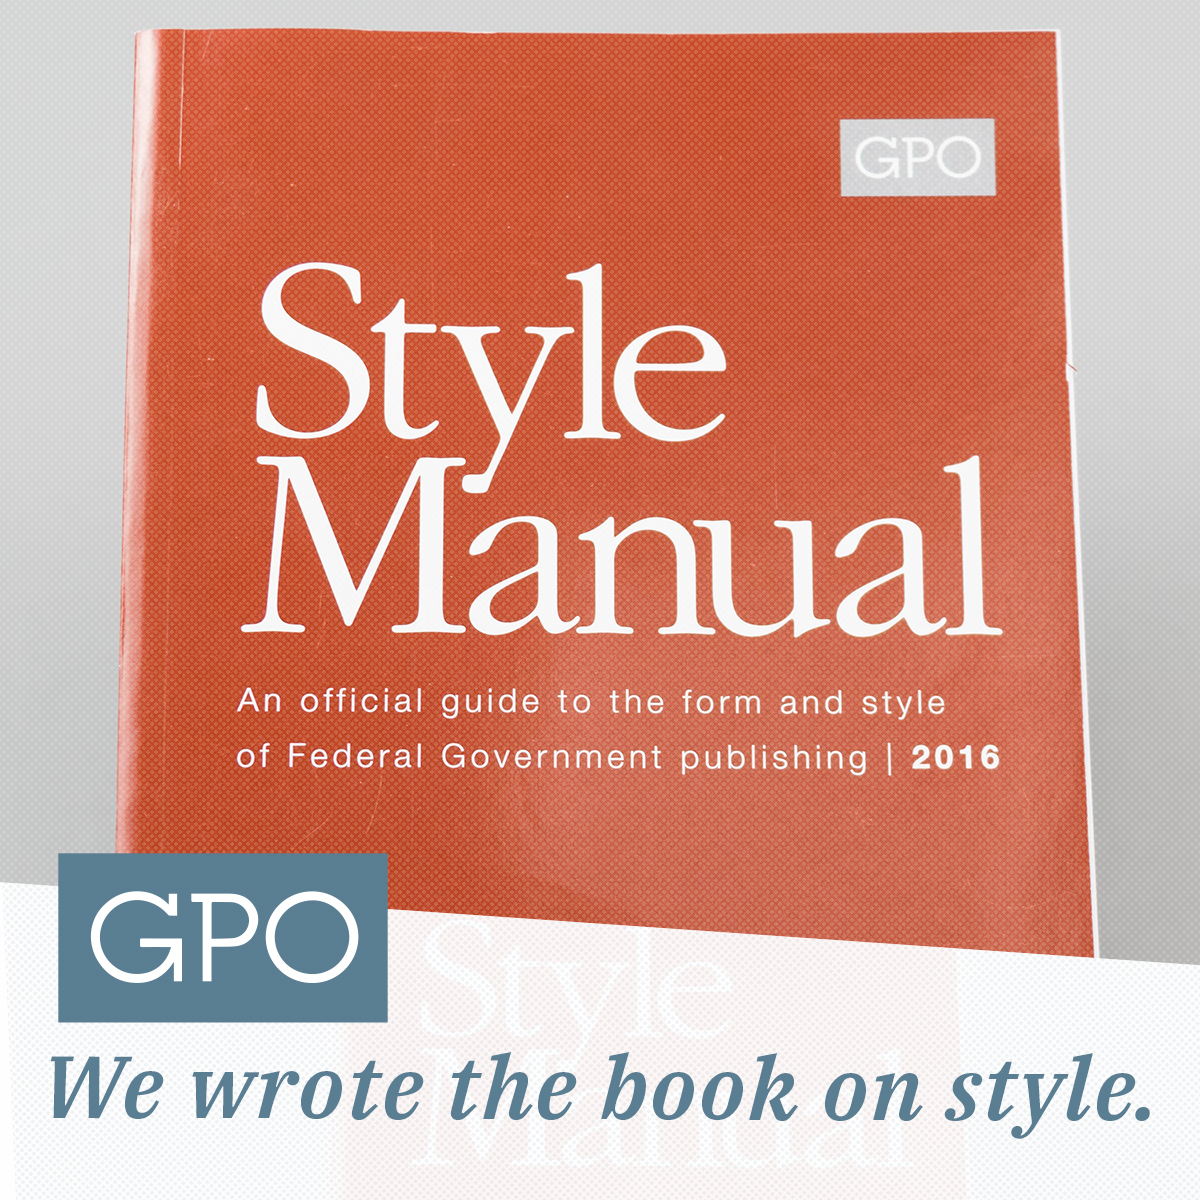 Do you know the correct term for residents of your state? The GPO Style Manual has set the standard since 1894. To see your state, see page 95. govinfo.gov/content/pkg/GP…